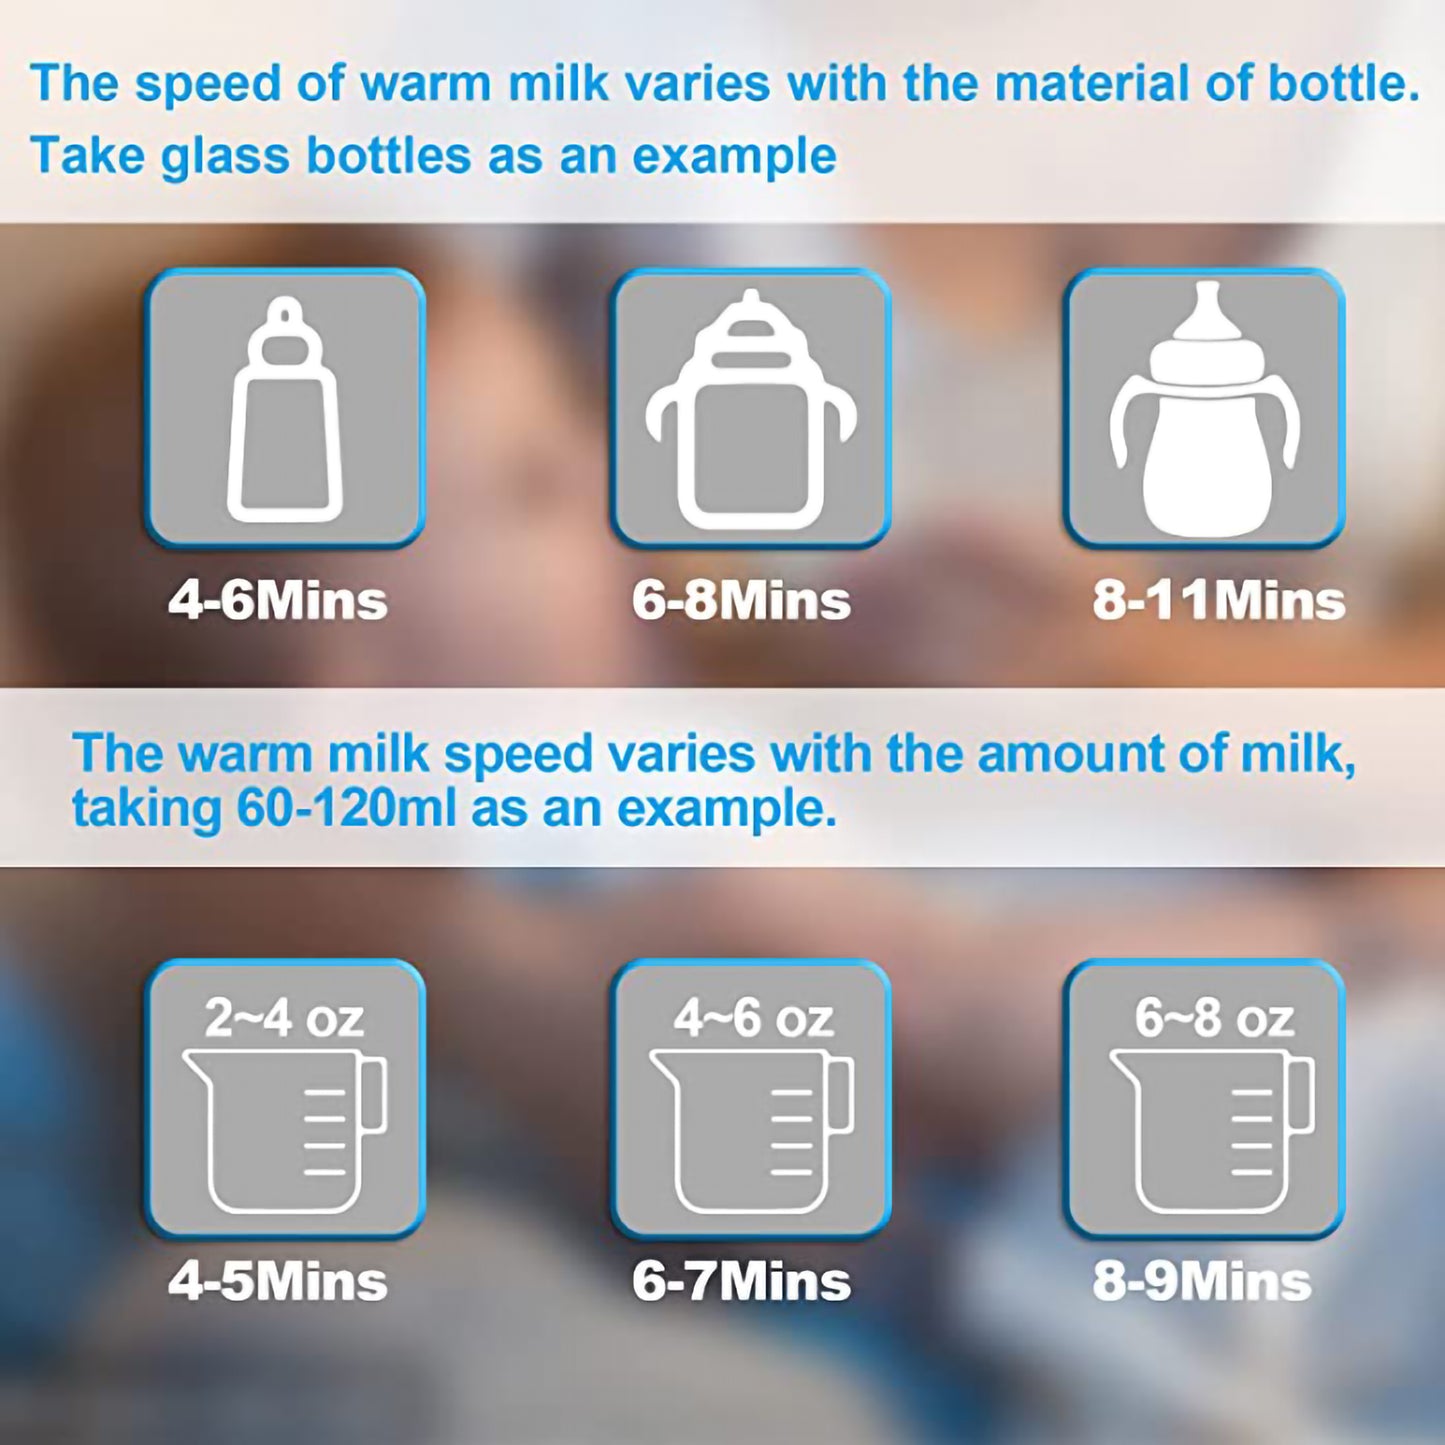 Baby Bottle Warmer 6 in 1 Multifunction Breast Milk Warmer, Fast Baby Food Heater & Defrost Warmer with Timer for Twins, LCD Display Accurate Temperature Adjustment, 24H Constant Mode